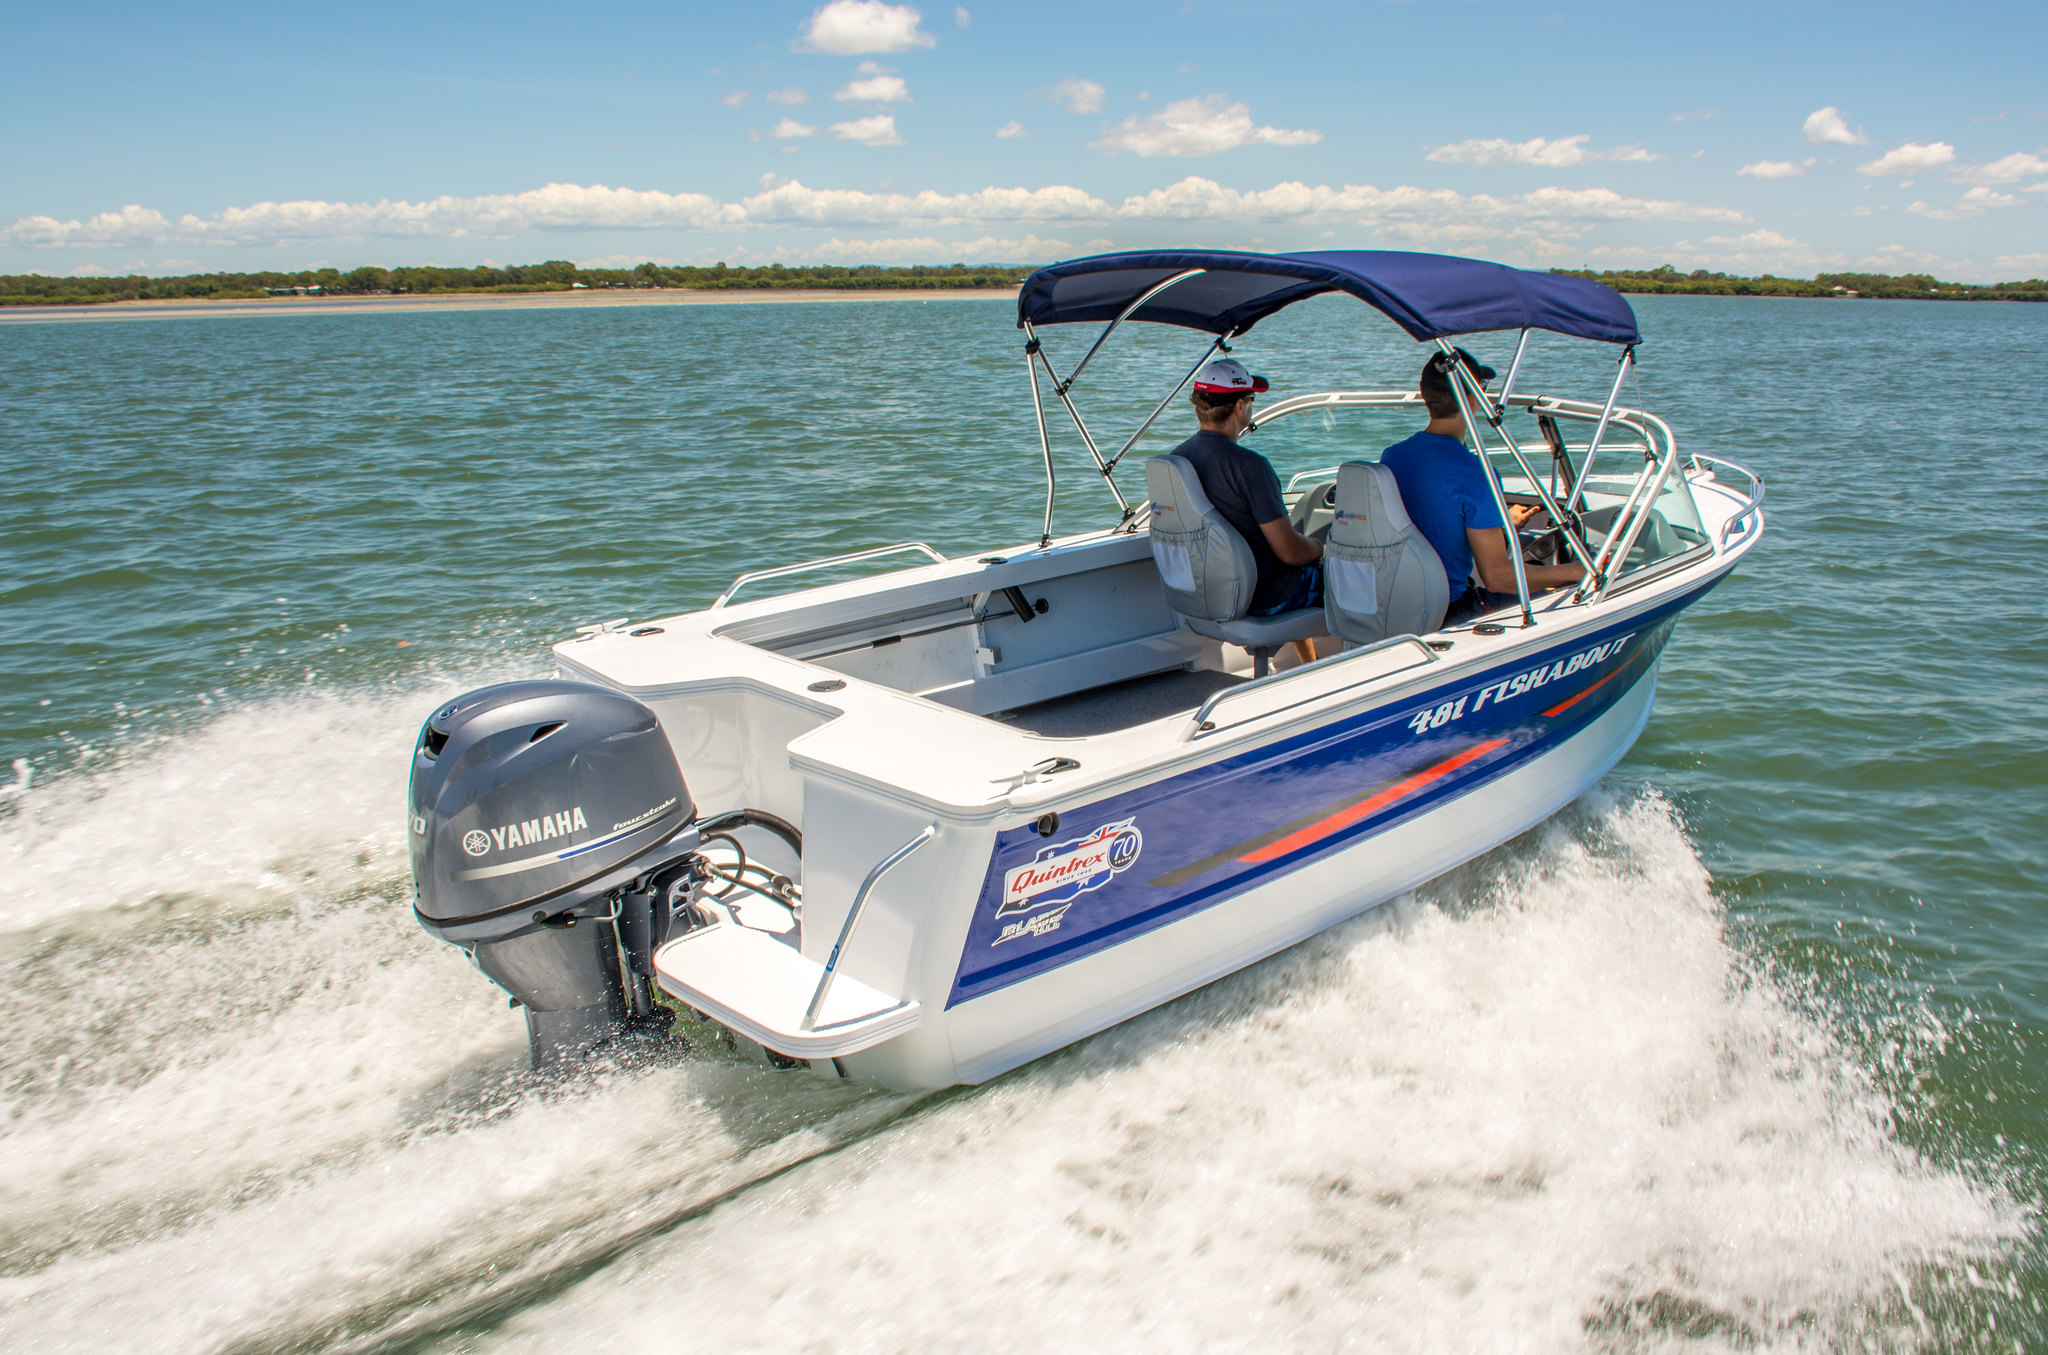 7 Ways on How to Maintain A Boat On a Budget